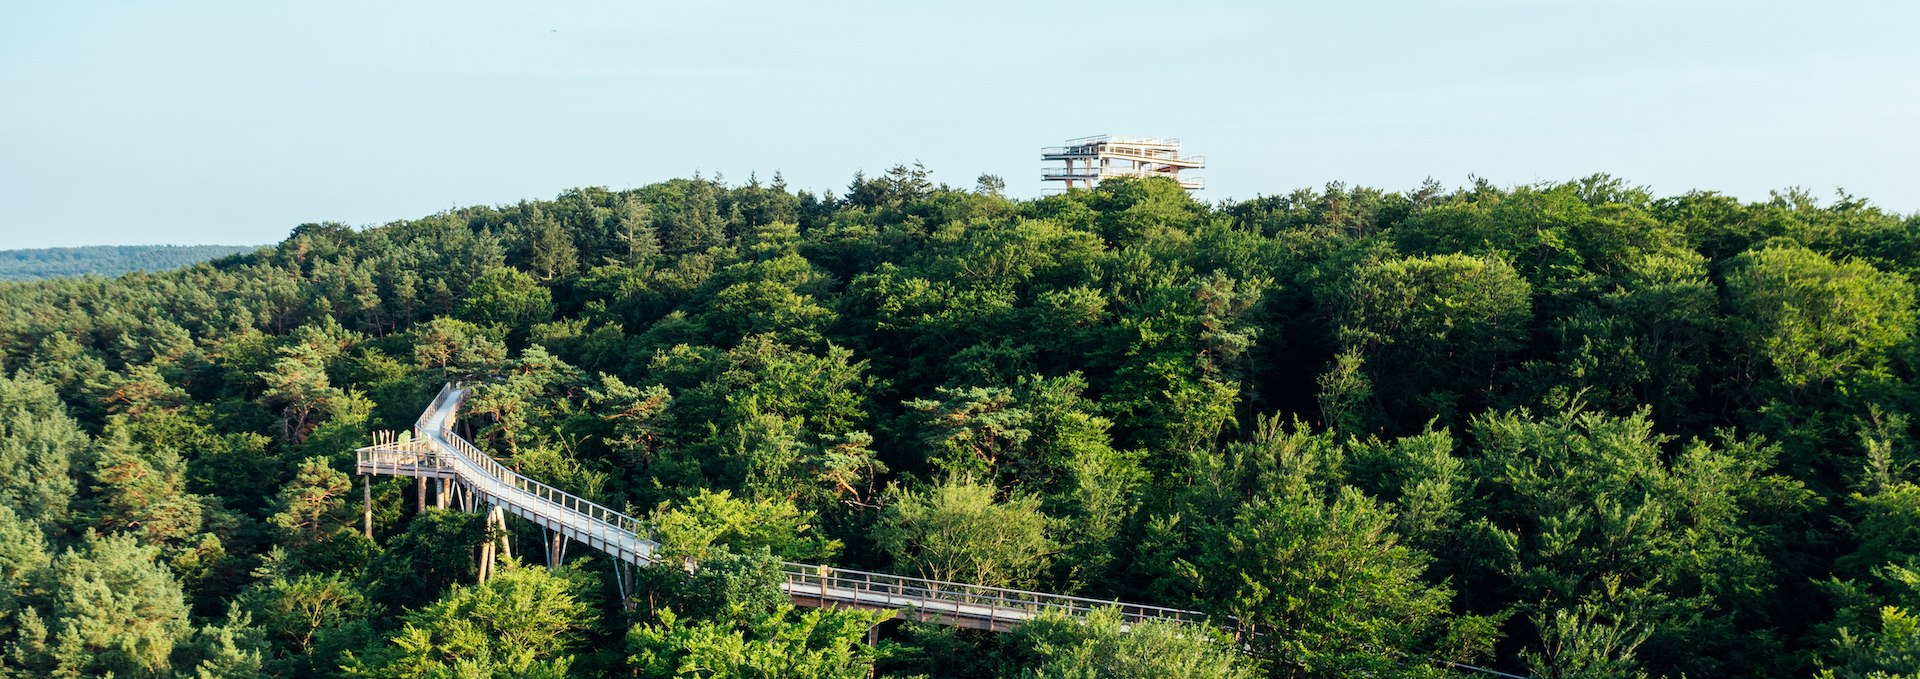 The tree top walk on the Island of Usedom from the air nestled in the forest and overlooking the Baltic Sea., © TMV/Gänsicke